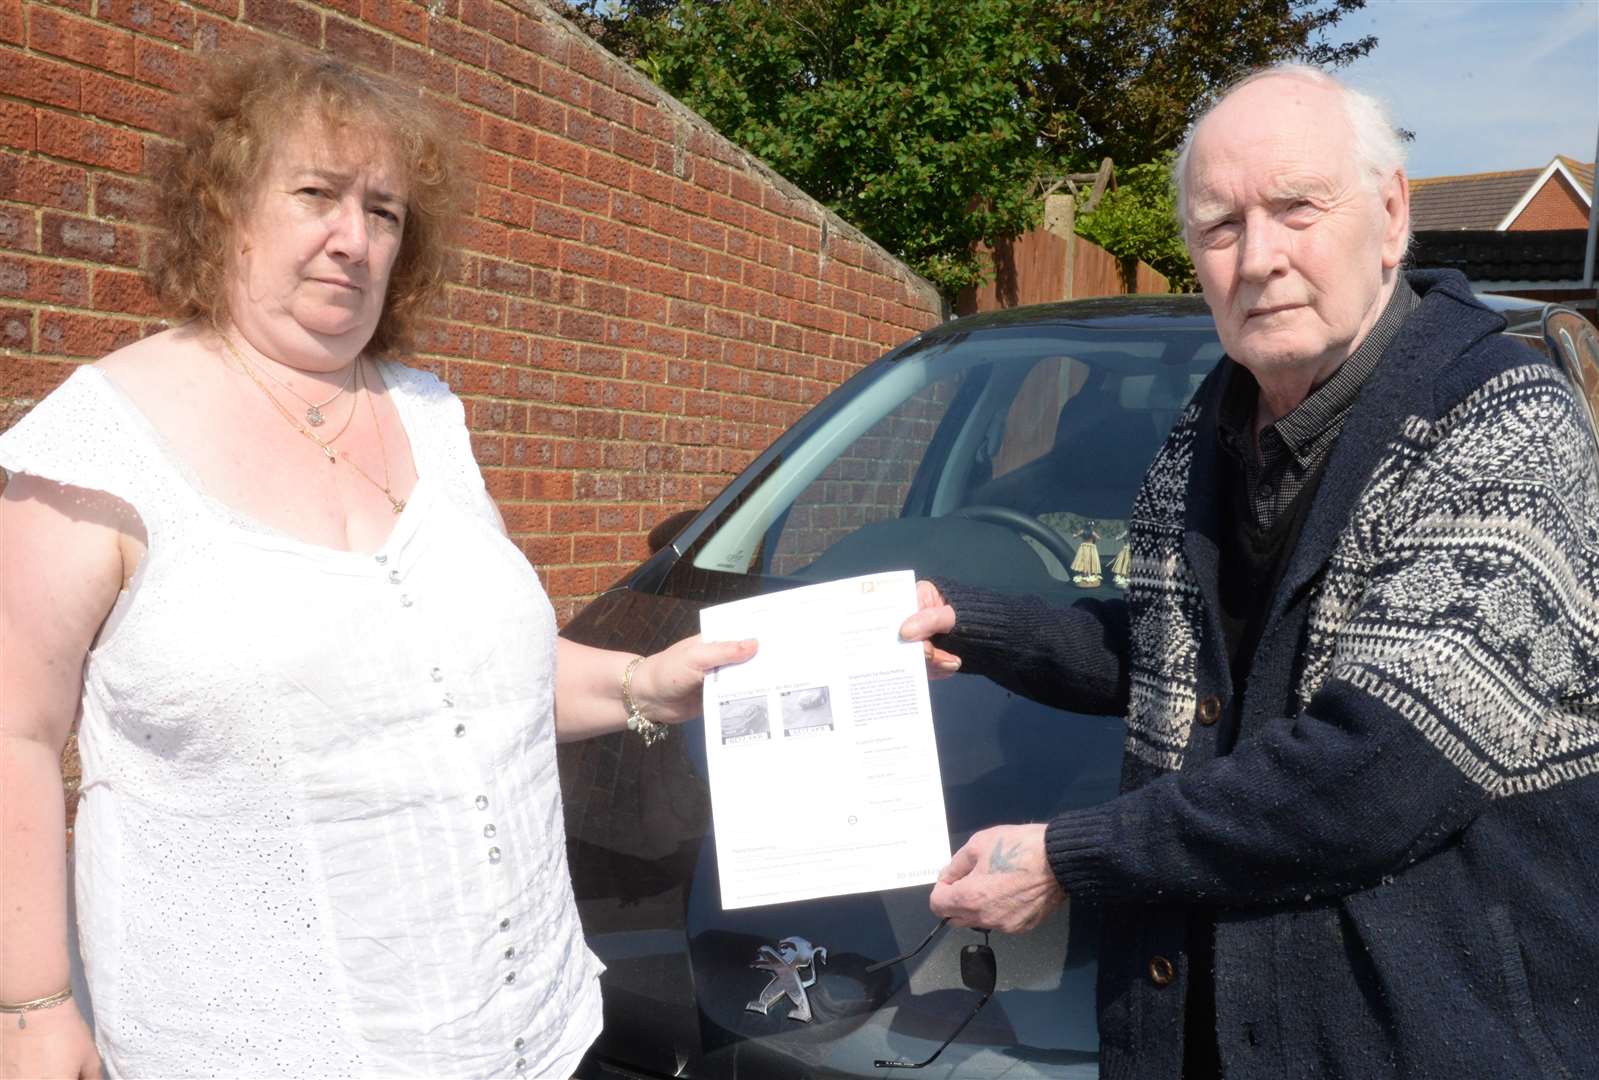 Barbara and Tony Pogson were fined £60 for overstaying at Whitstable Health Centre